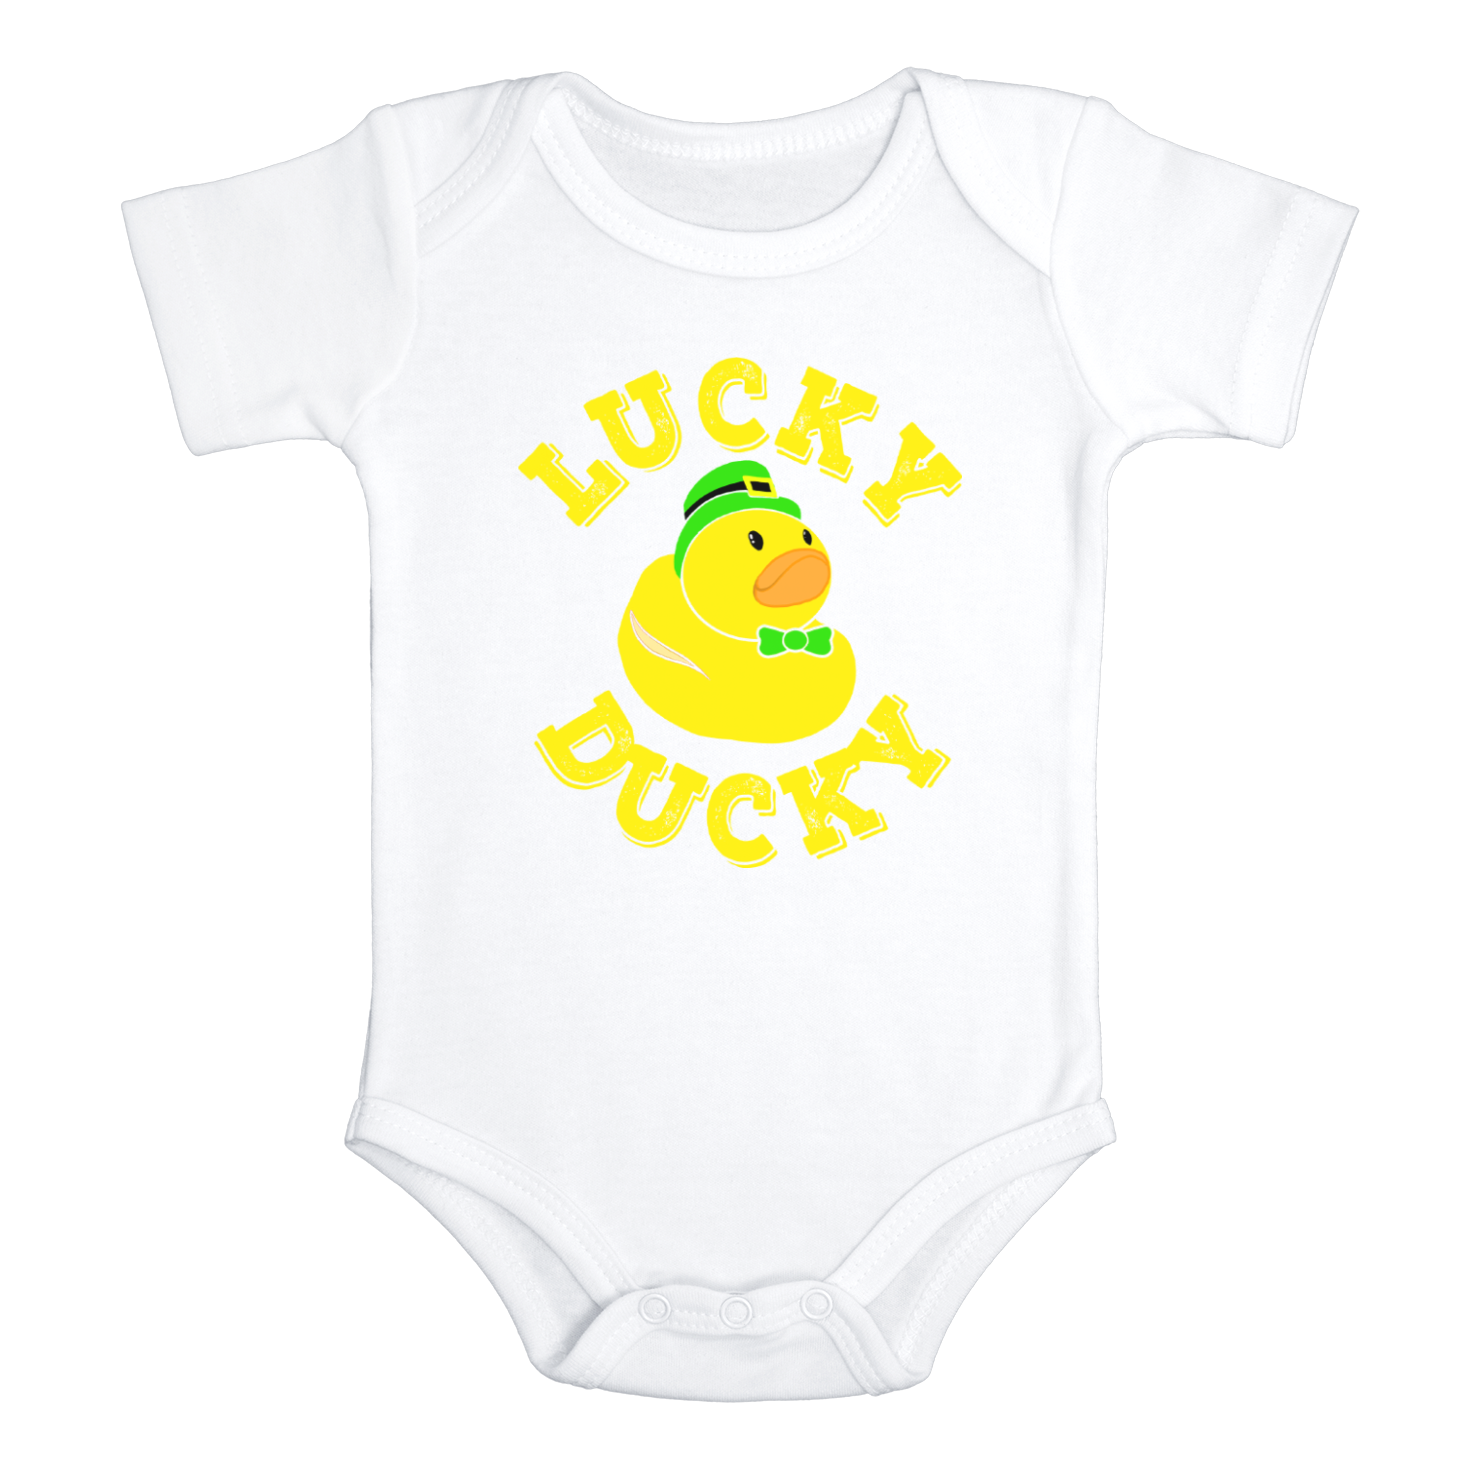 LUCKY DUCKY Funny Baby Bodysuit St. Patrick's Day Onesie (white: short or long sleeve) toddler 3t 4t 5t Available